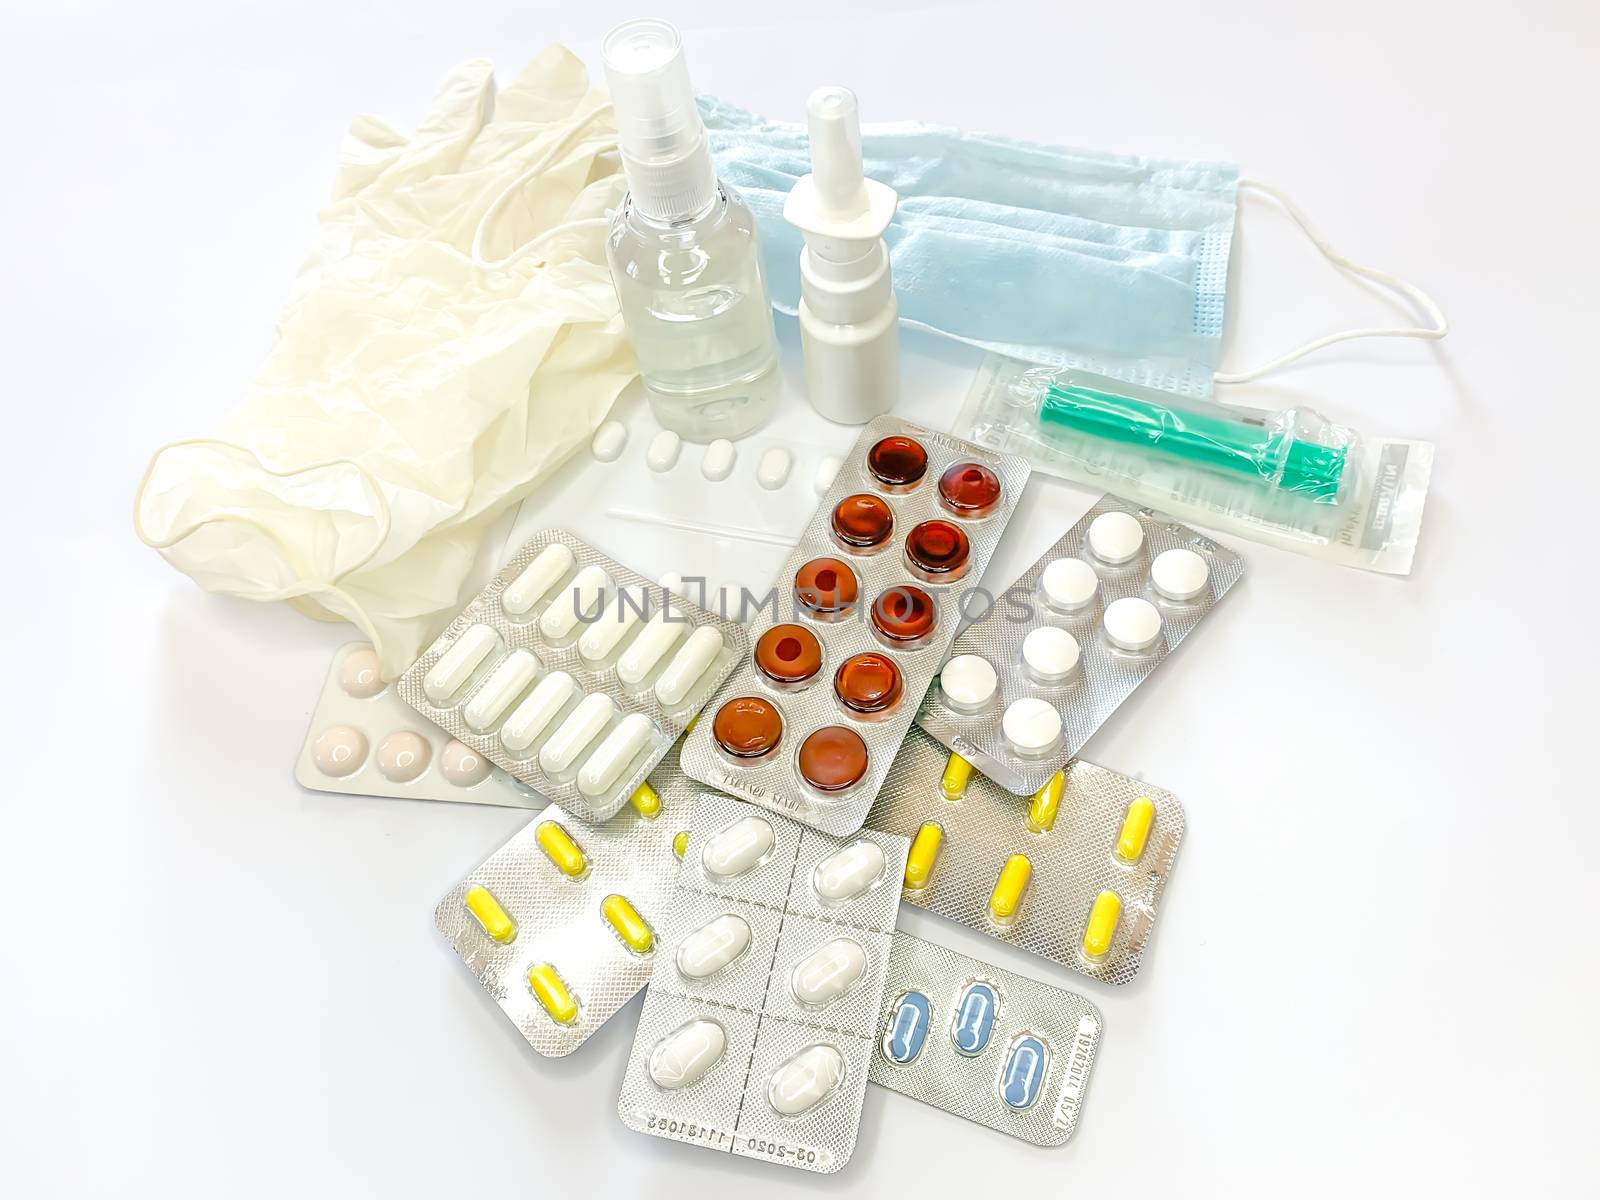 Different medicines: tablets, pills in blister pack, medications drugs, medical gloves, mask, syringe, thermometer, spray, sanitizer on a white background. Horizontal photo